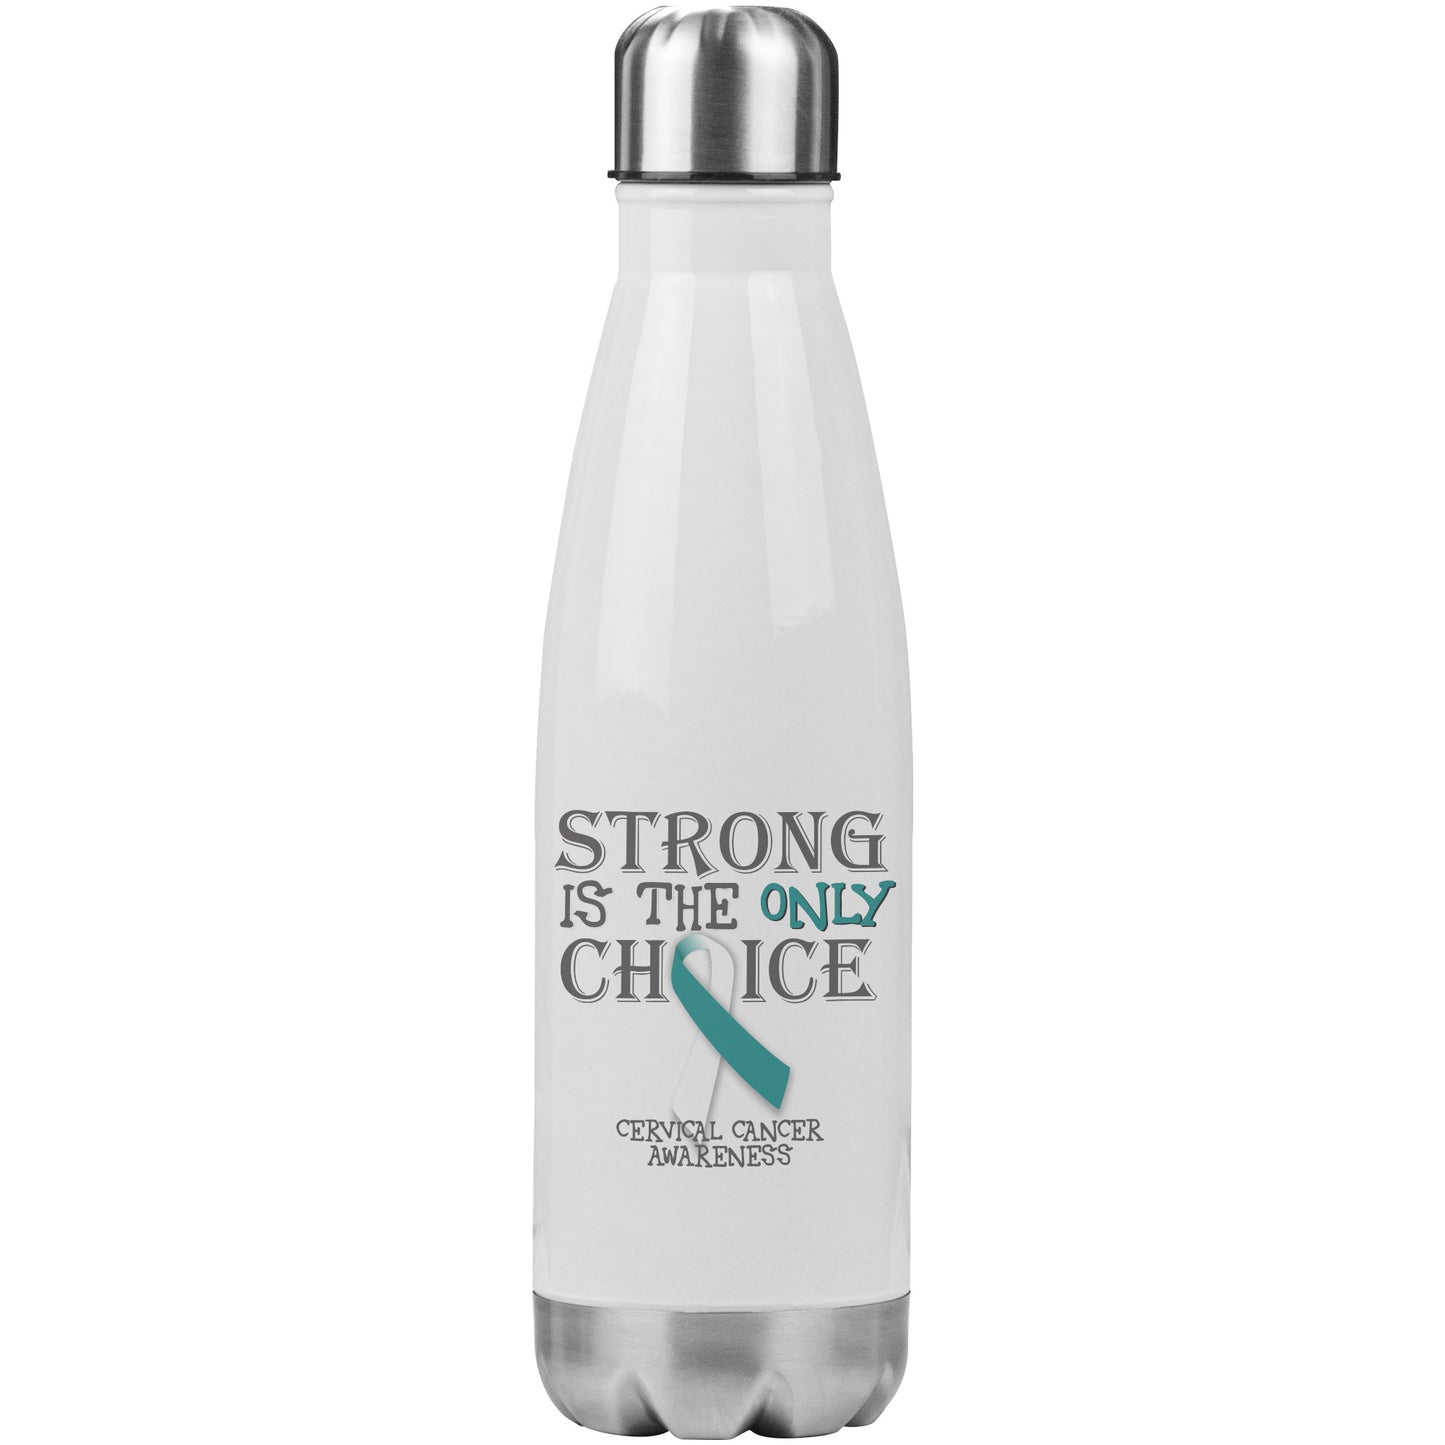 Strong is the Only Choice -Cervical Cancer Awareness 20oz Insulated Water Bottle